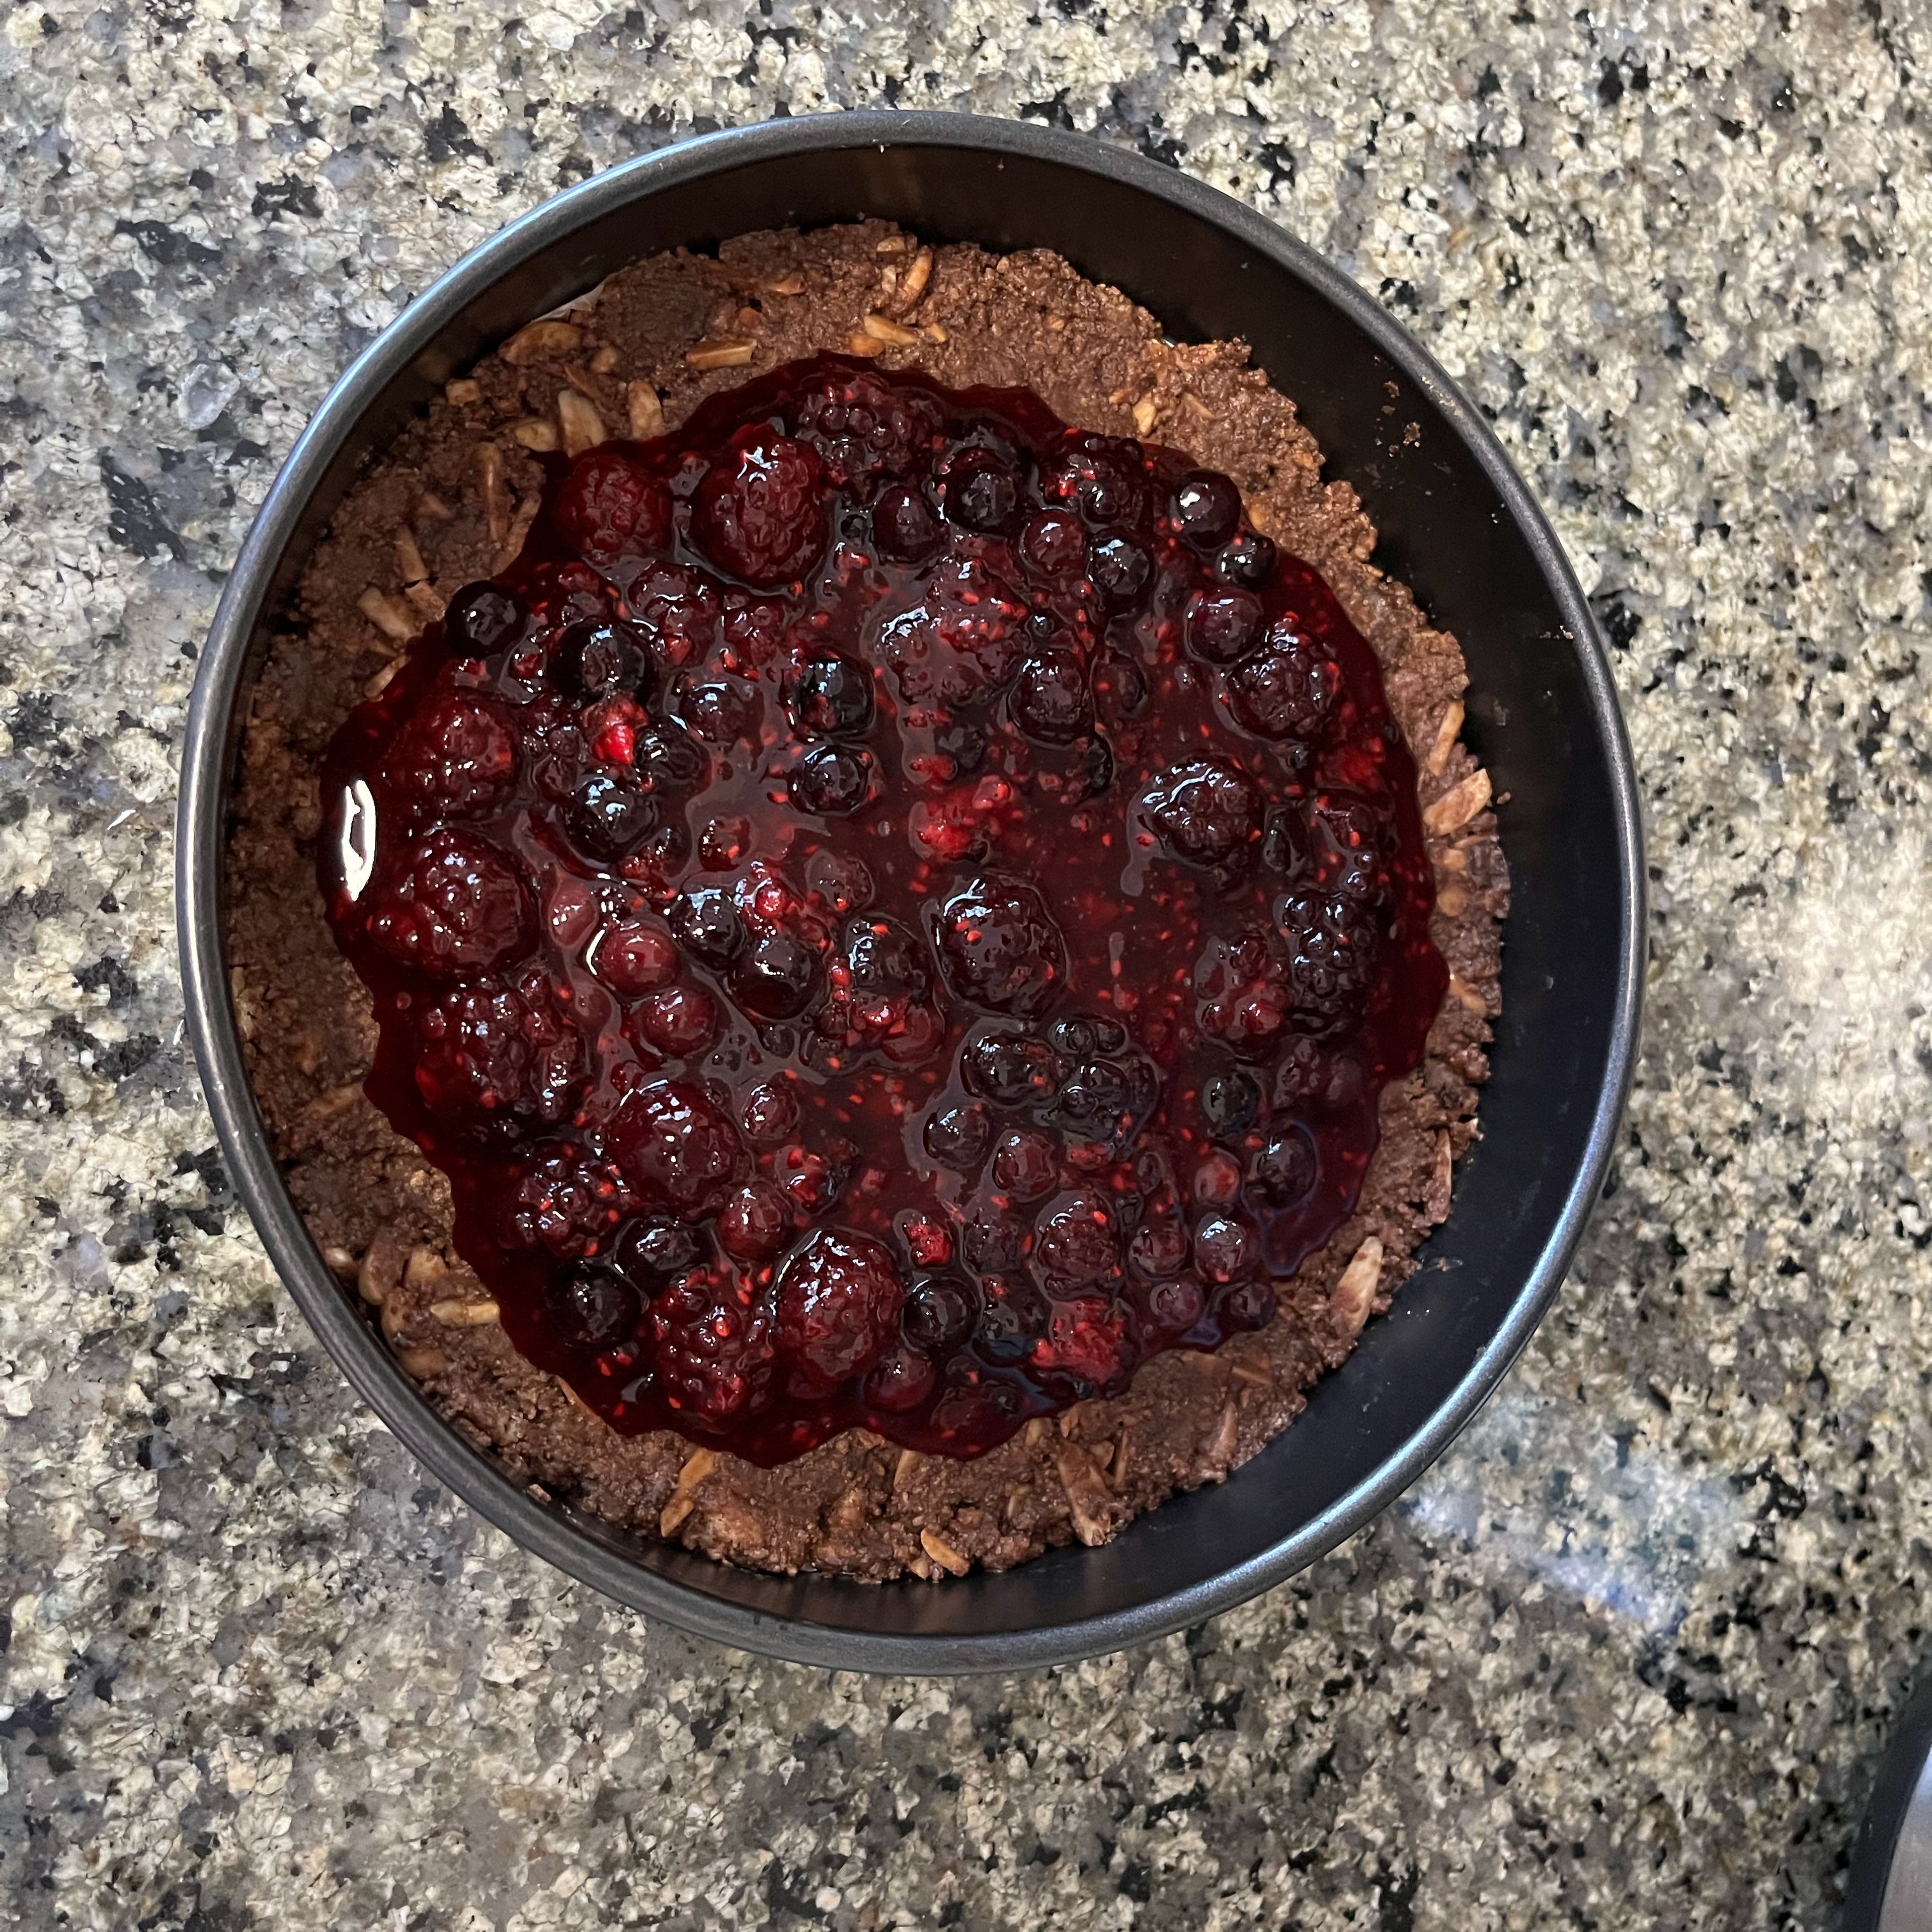 Combine sugar and starch with 25g of water. Add to the berries and bring mix to boil. Once boiling, remove from heat and leave to cool. Add the cooled and thickened berry mix on top of the cake base - leave a rim around the edge.